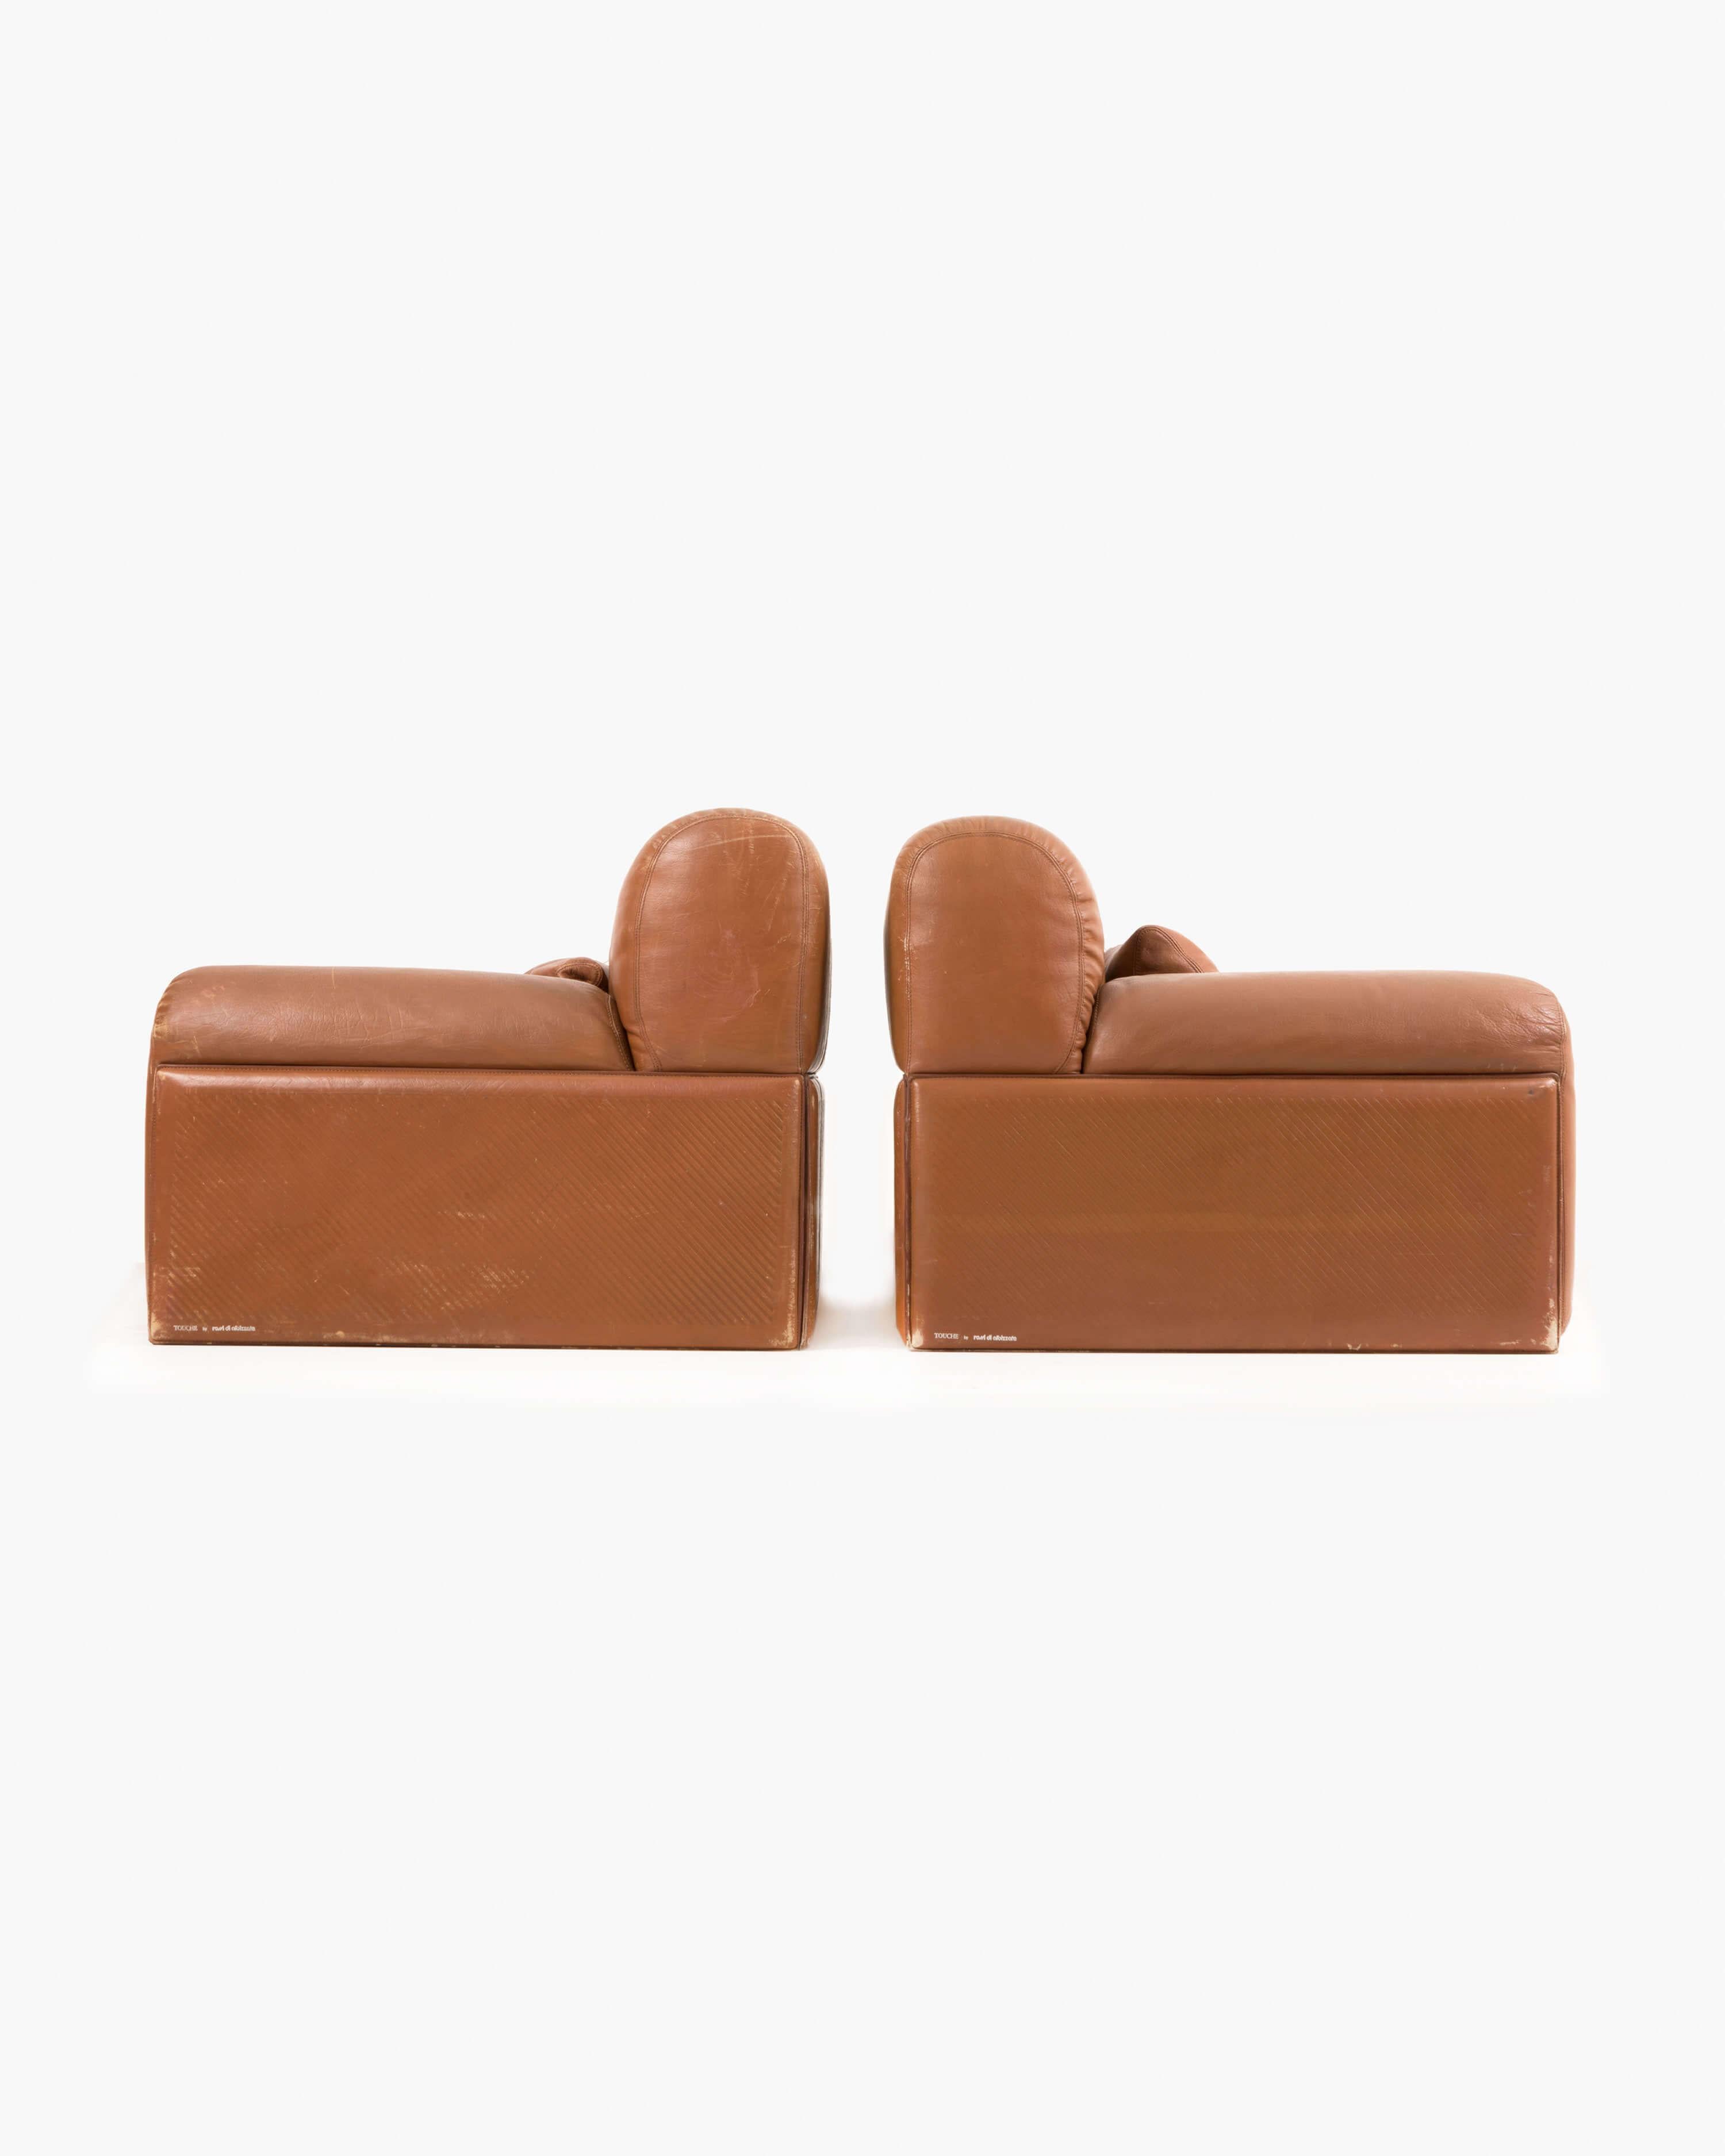 Italian Signed Pair of Touche Leather Armchairs by Rossi di Albizzate, circa 1970 For Sale